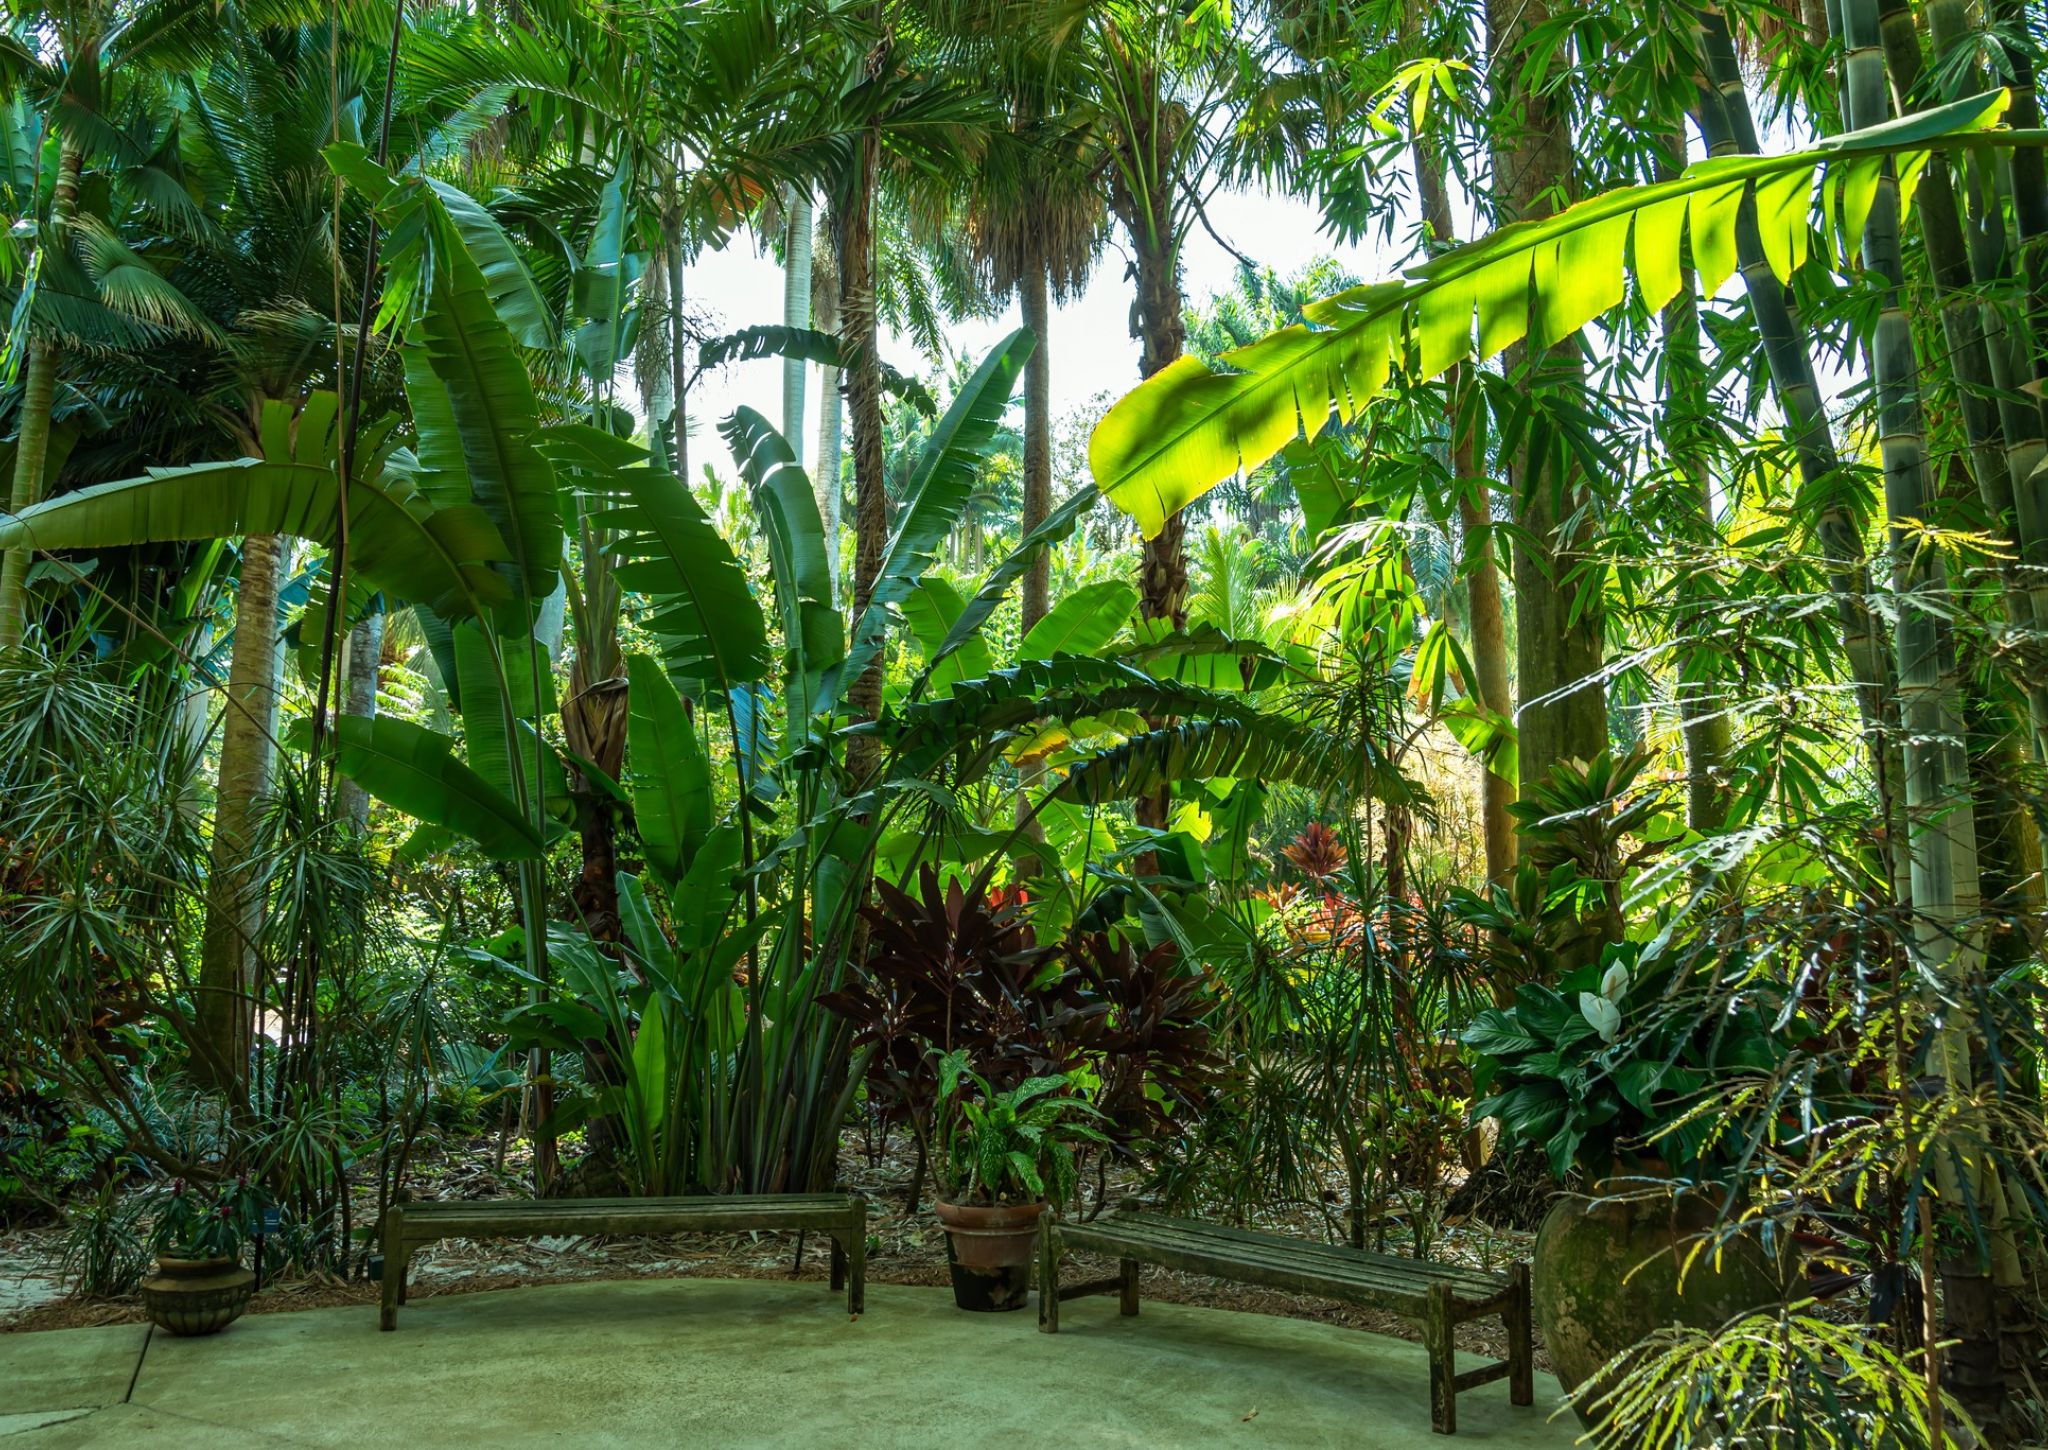 View of Sunken Gardens with benches and thousands of species of tropical plants and flowers